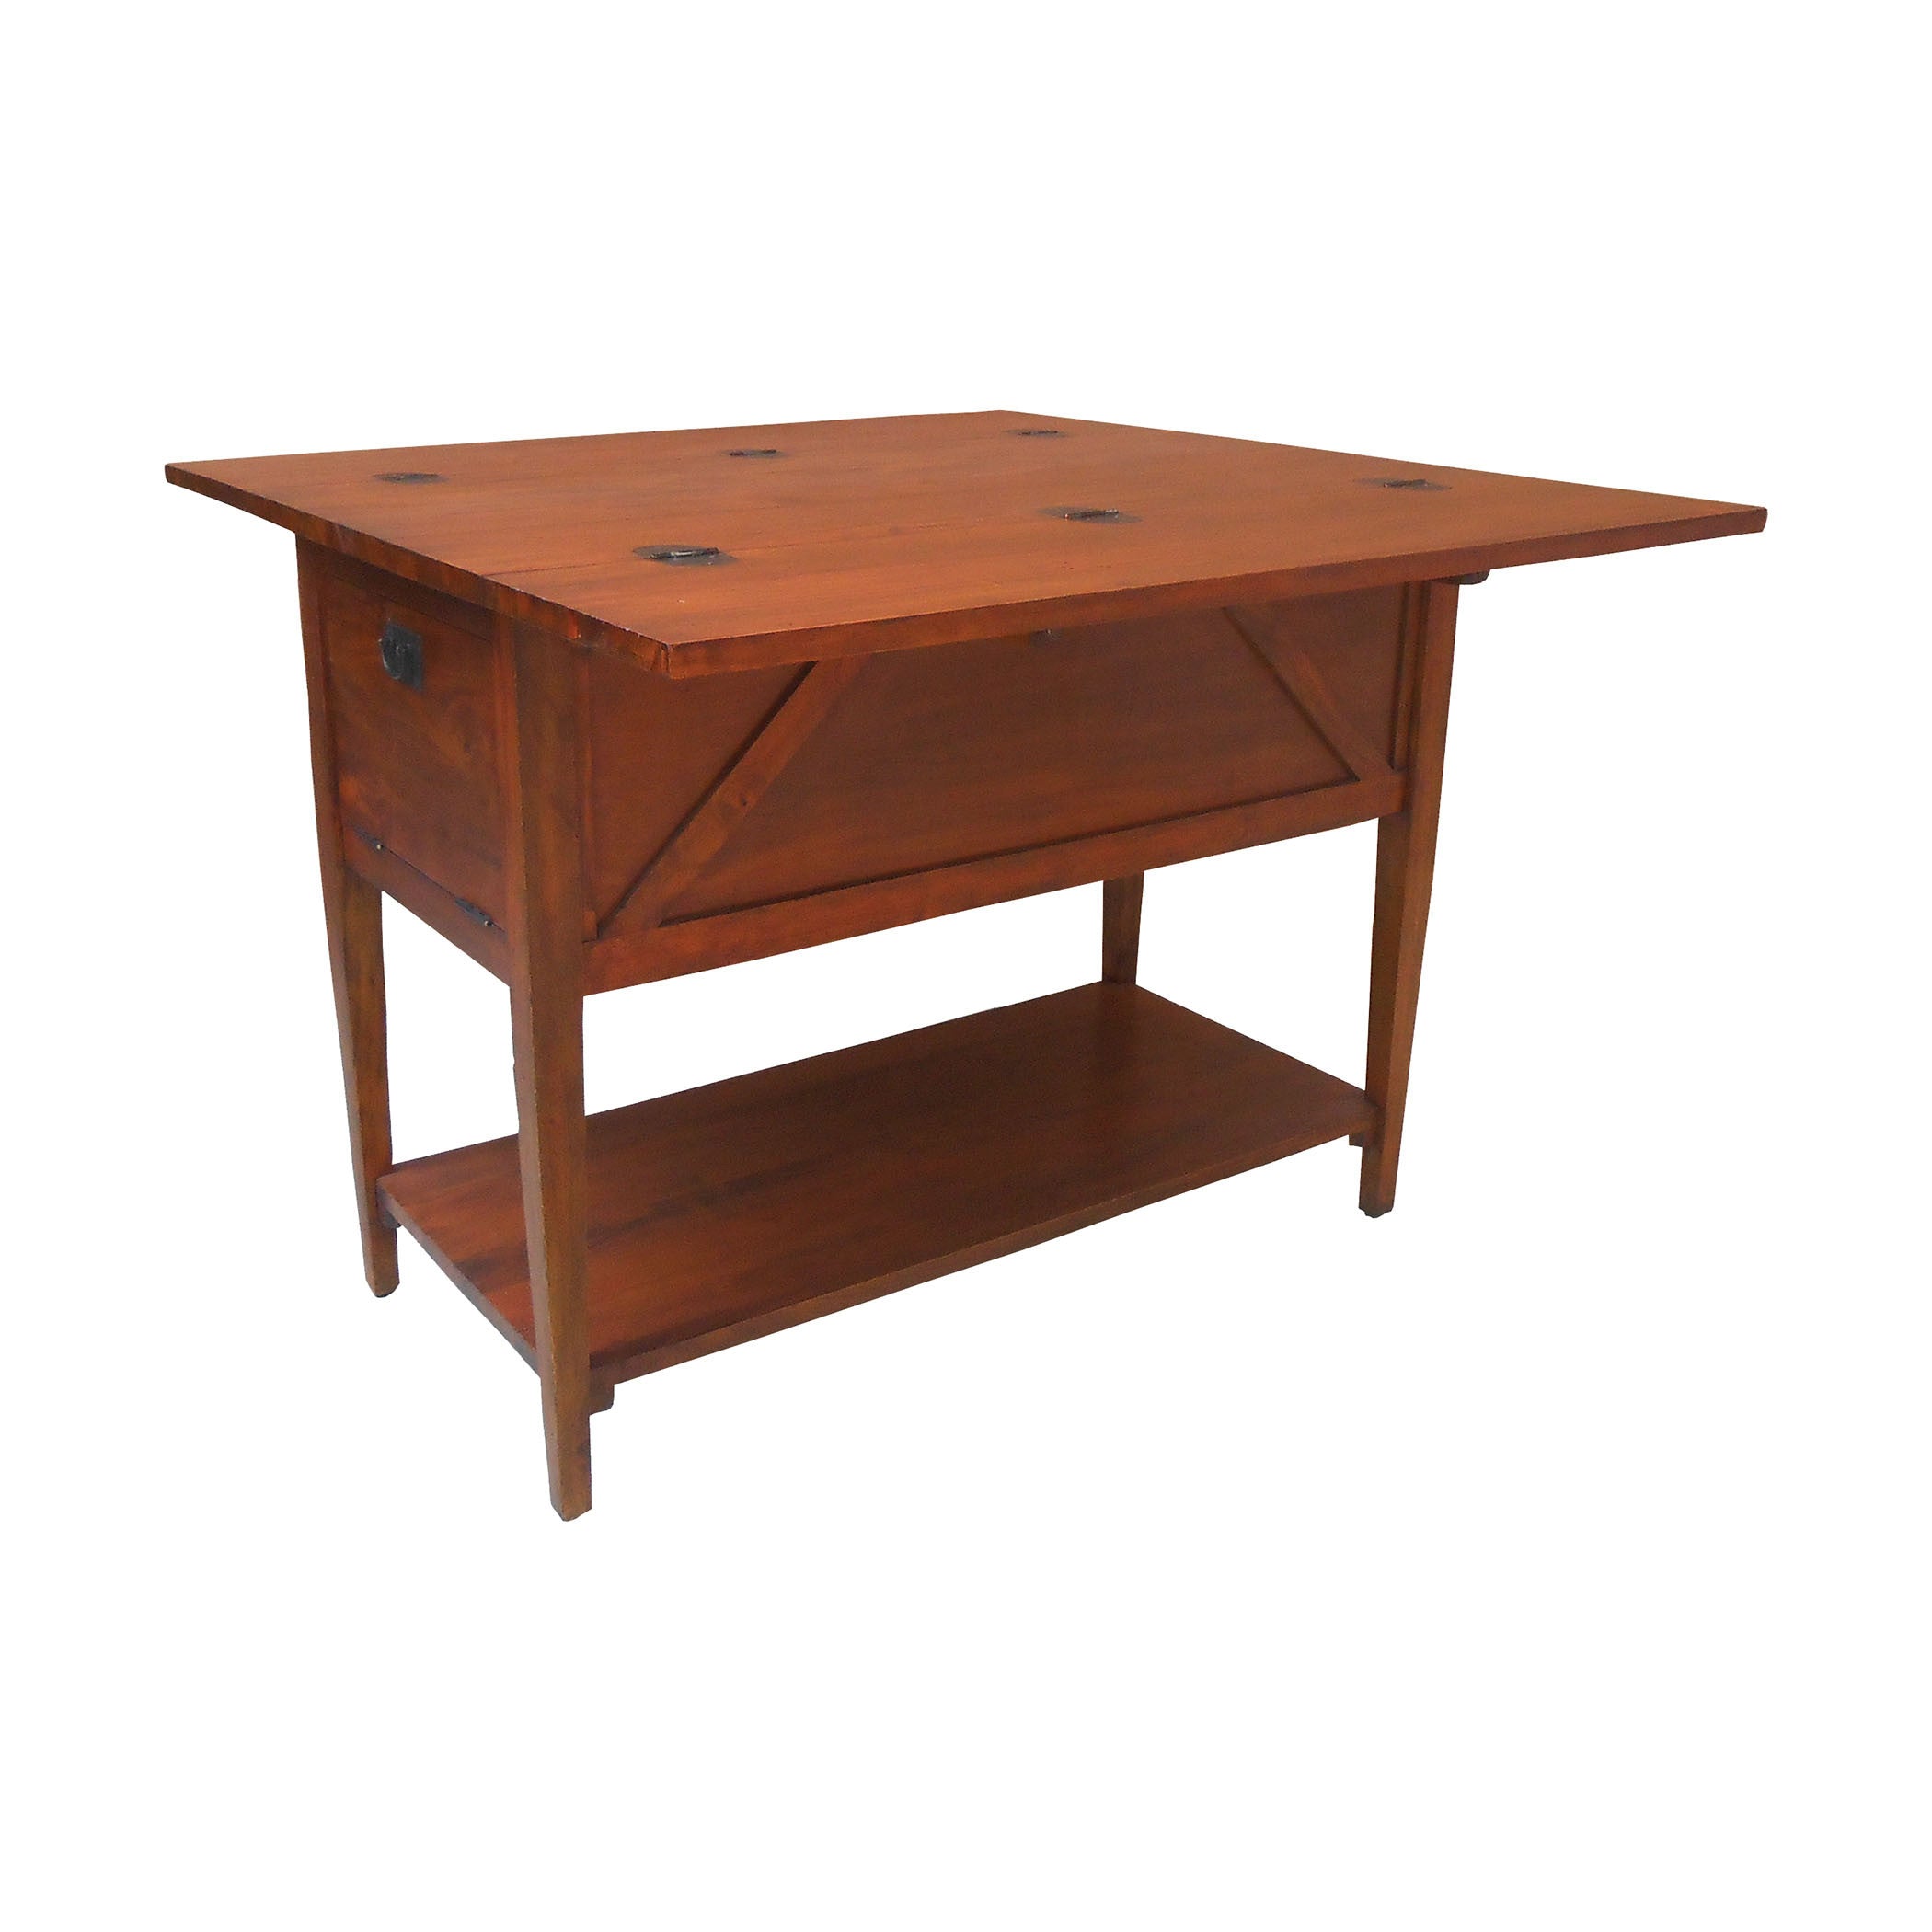 Guildmaster Gui-635001g Workshop Collection Handpainted Woodtone Finish Table